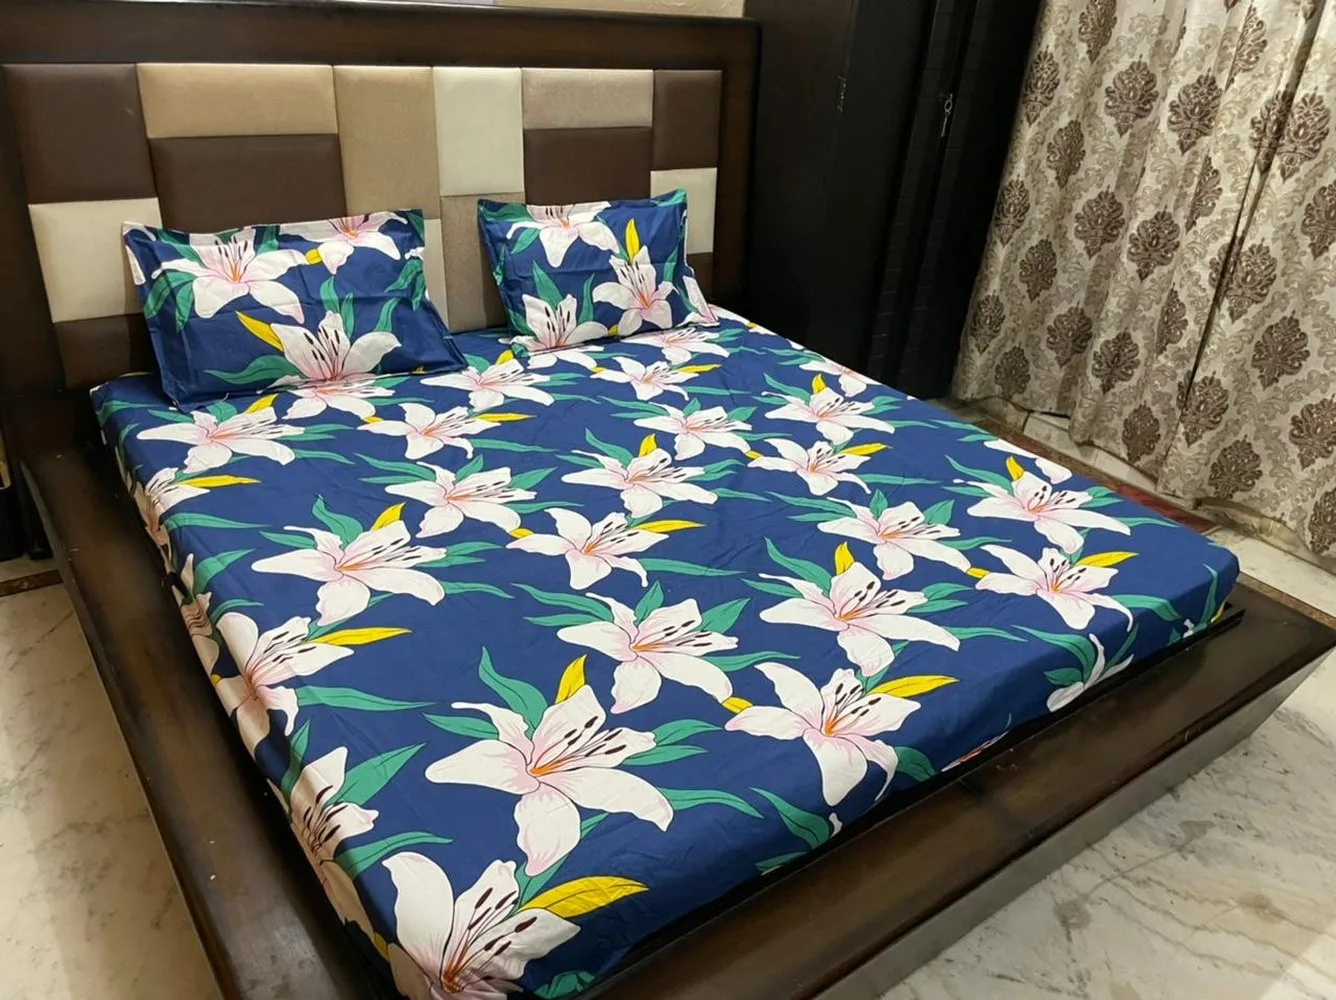 Bedsheet printed, Fitted, Elastic Corner, 90x100, Glace Cotton, 2 Pillow Covers, blue flower design